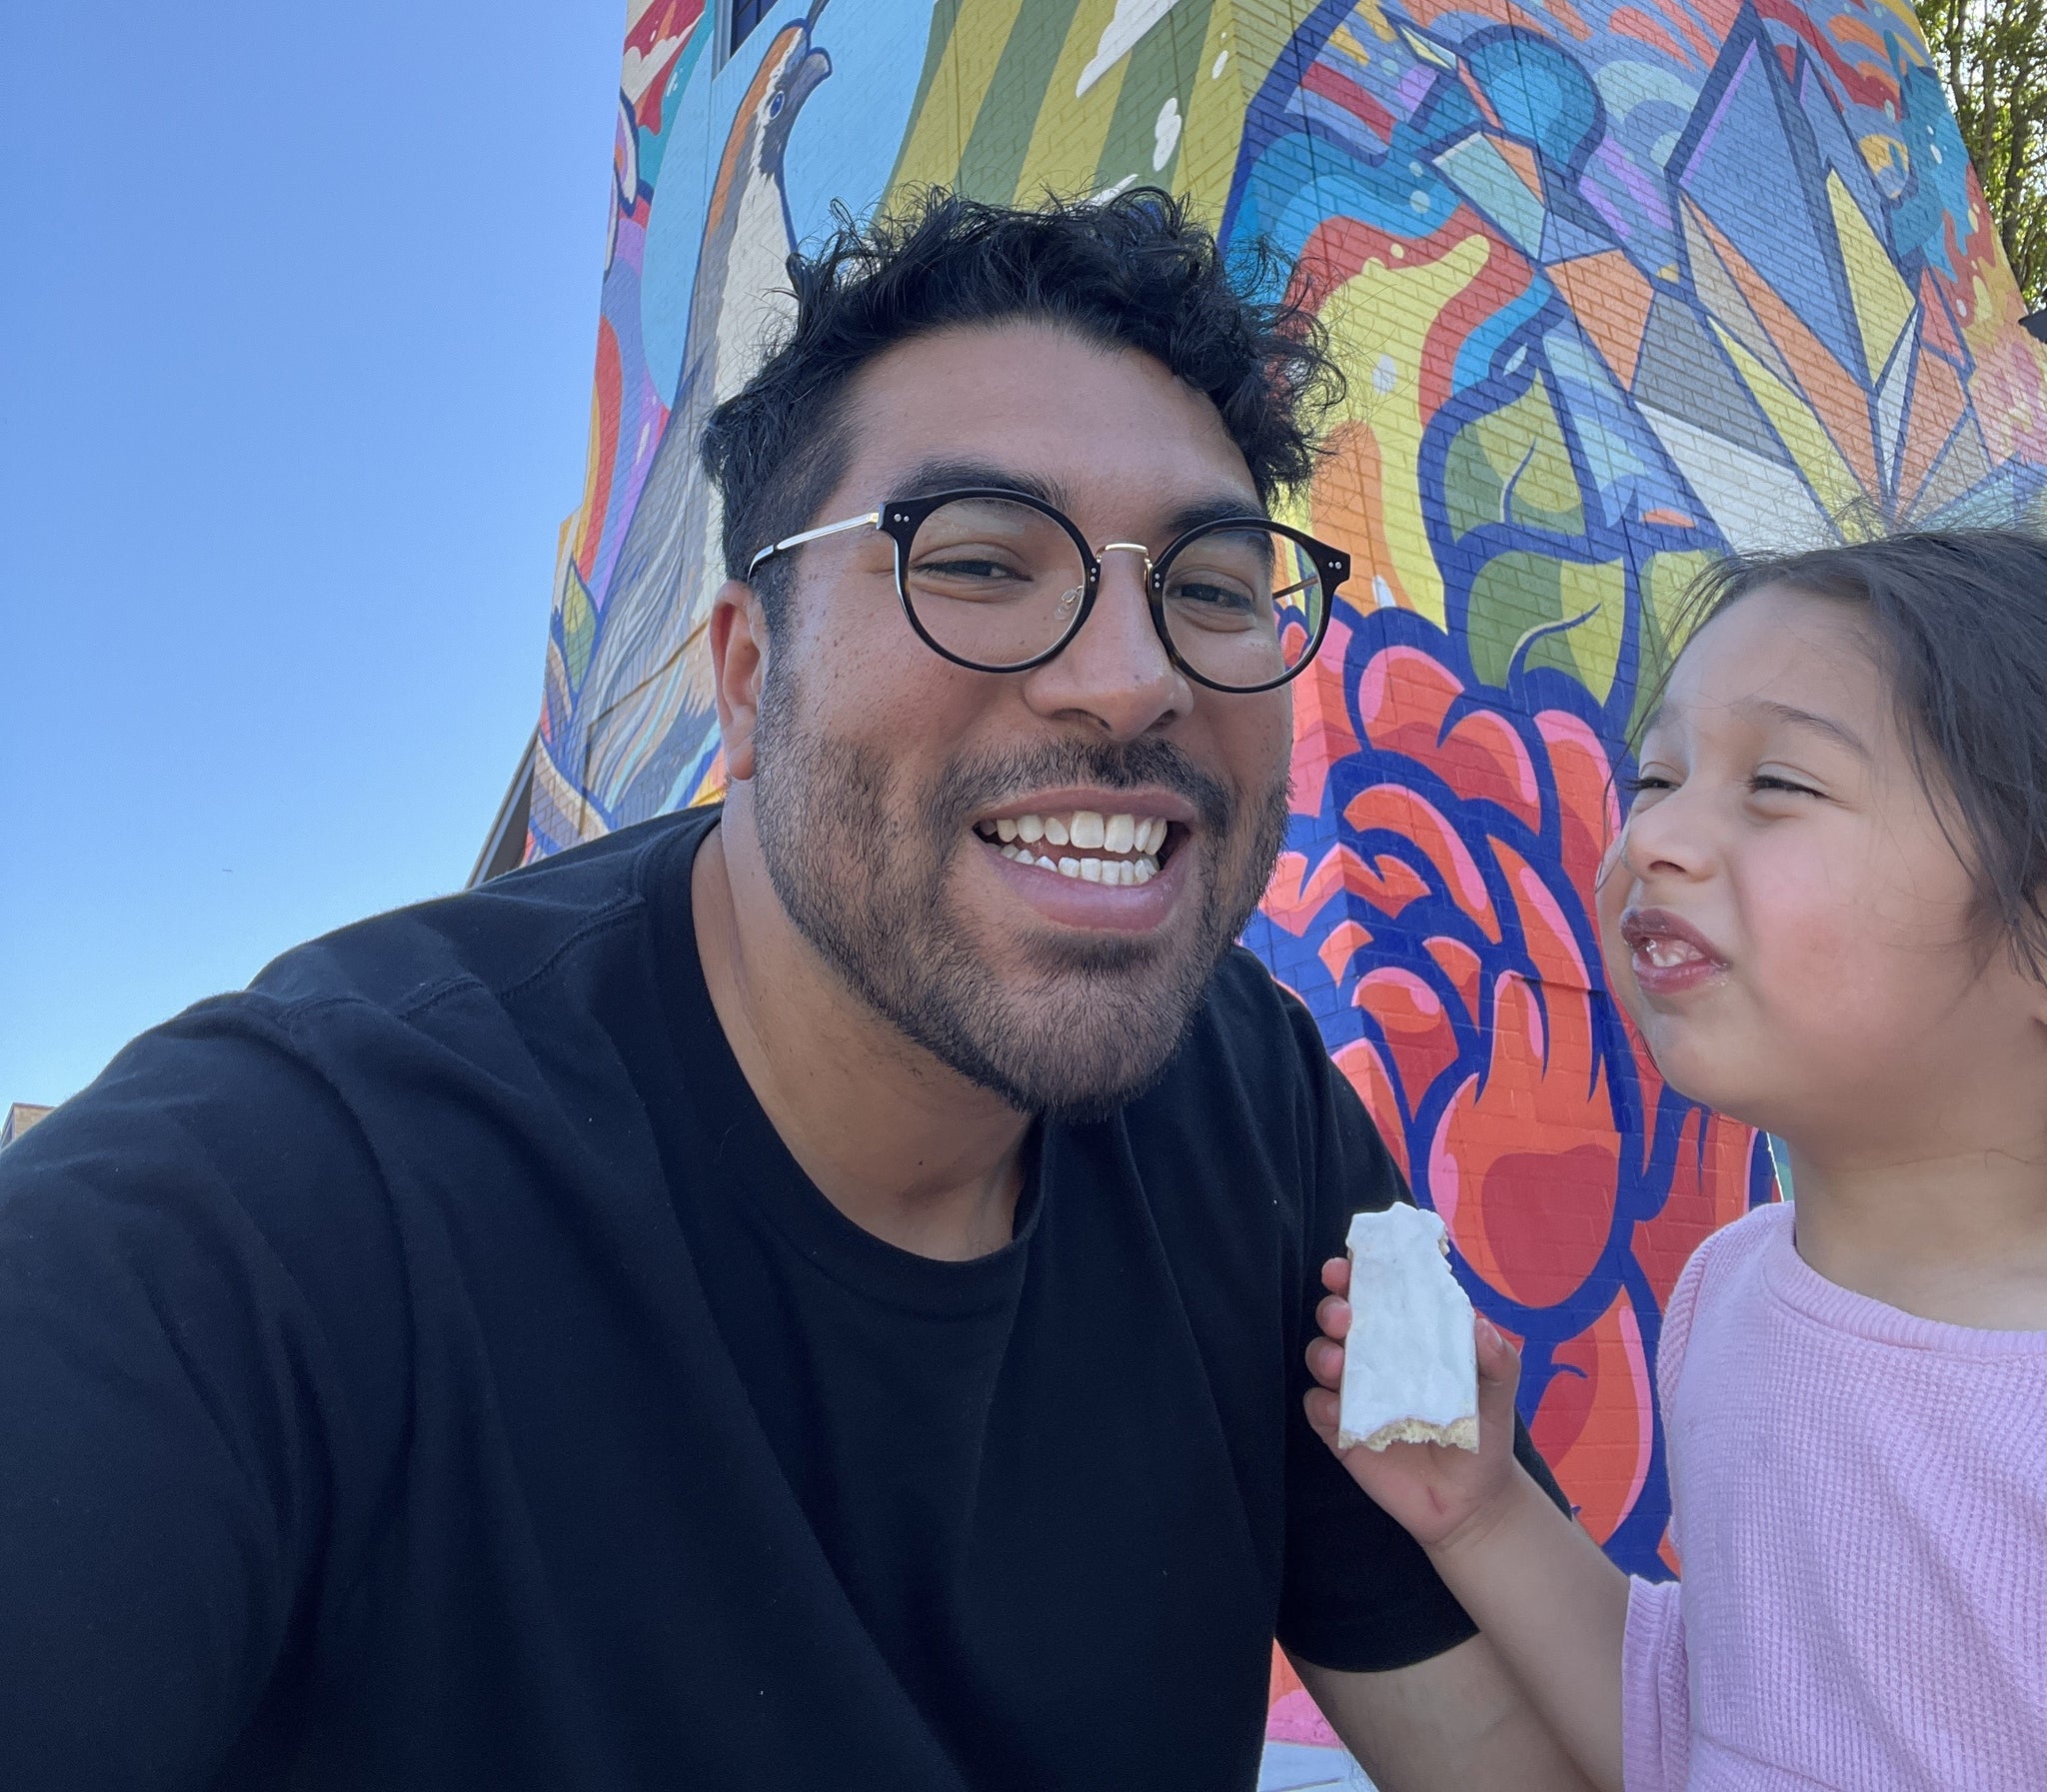 Anthony, smiling in a black T-shirt, with his daughter, who is eating something. Behind them is a colorful mural.